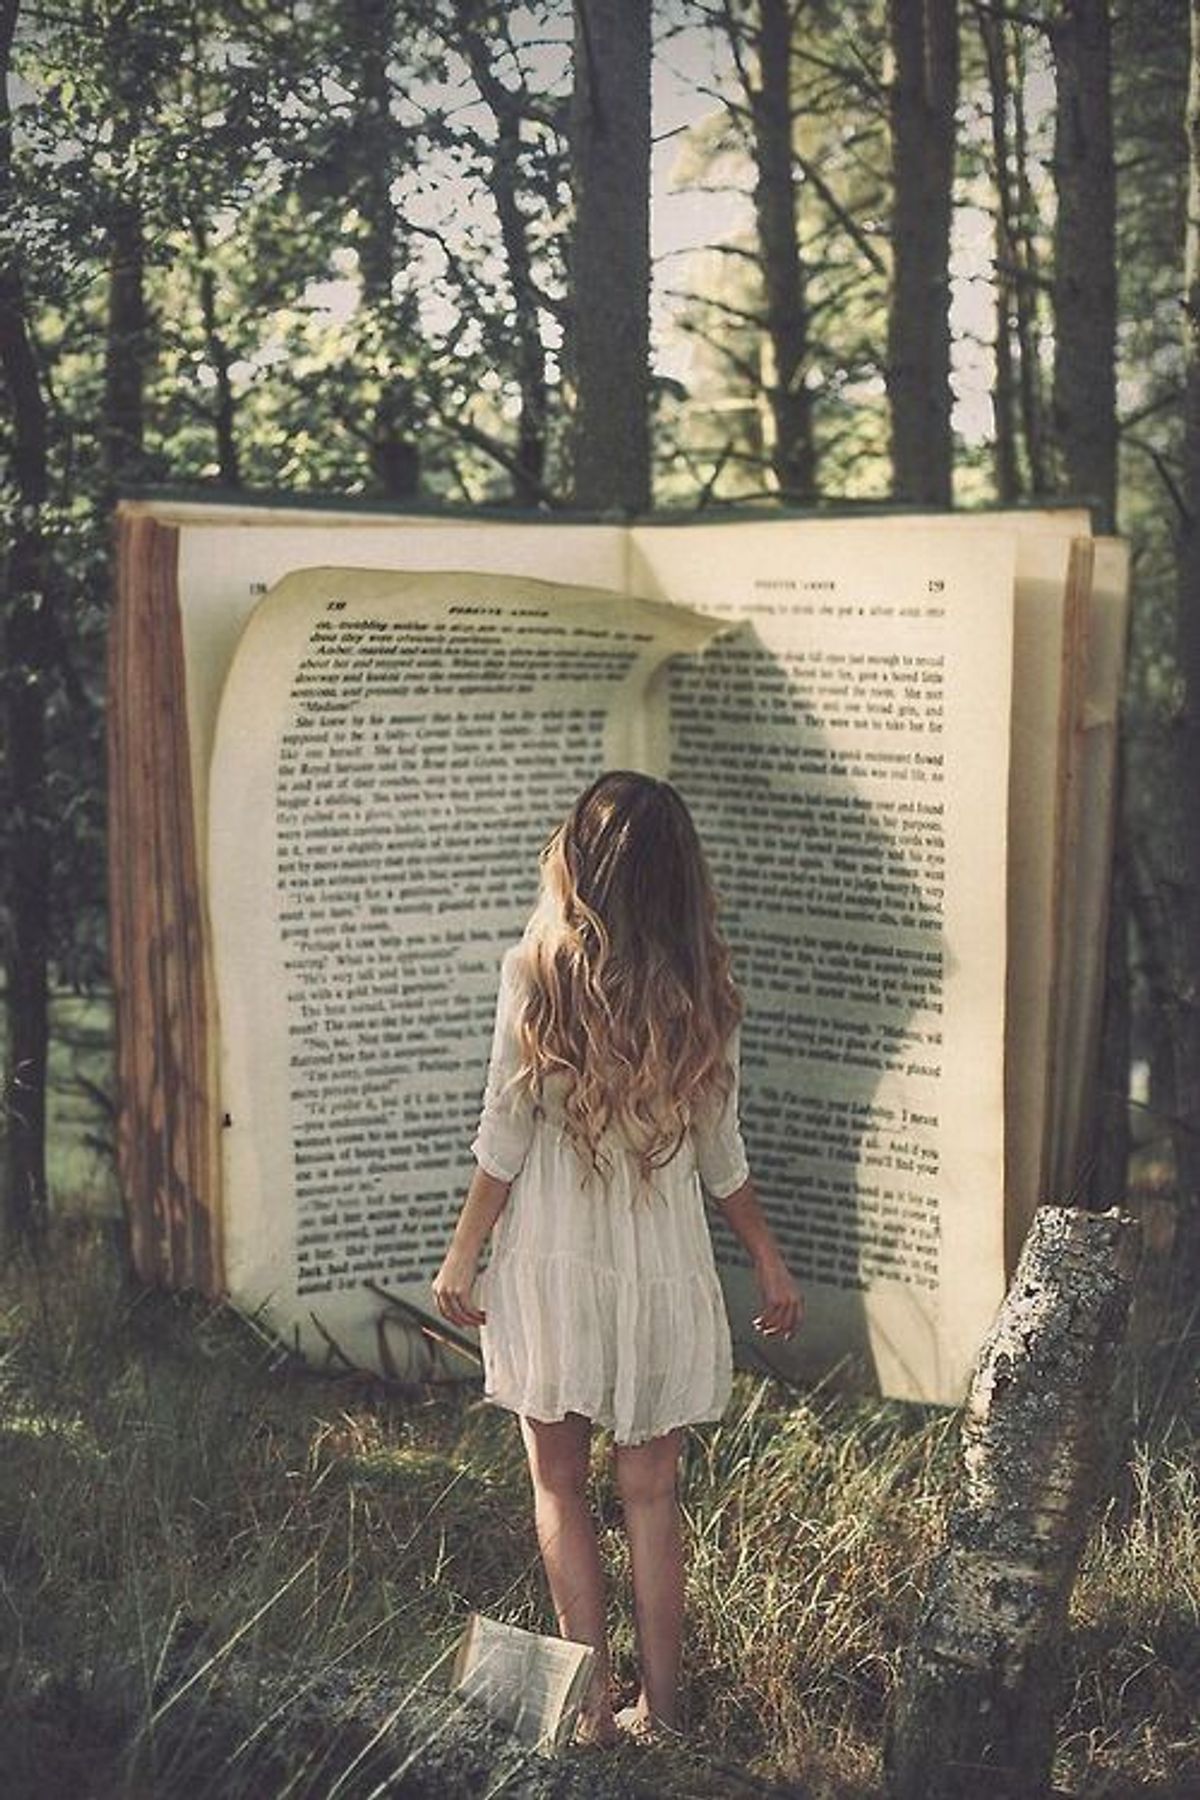 There's Just Something Beautiful About A Girl And Her Books